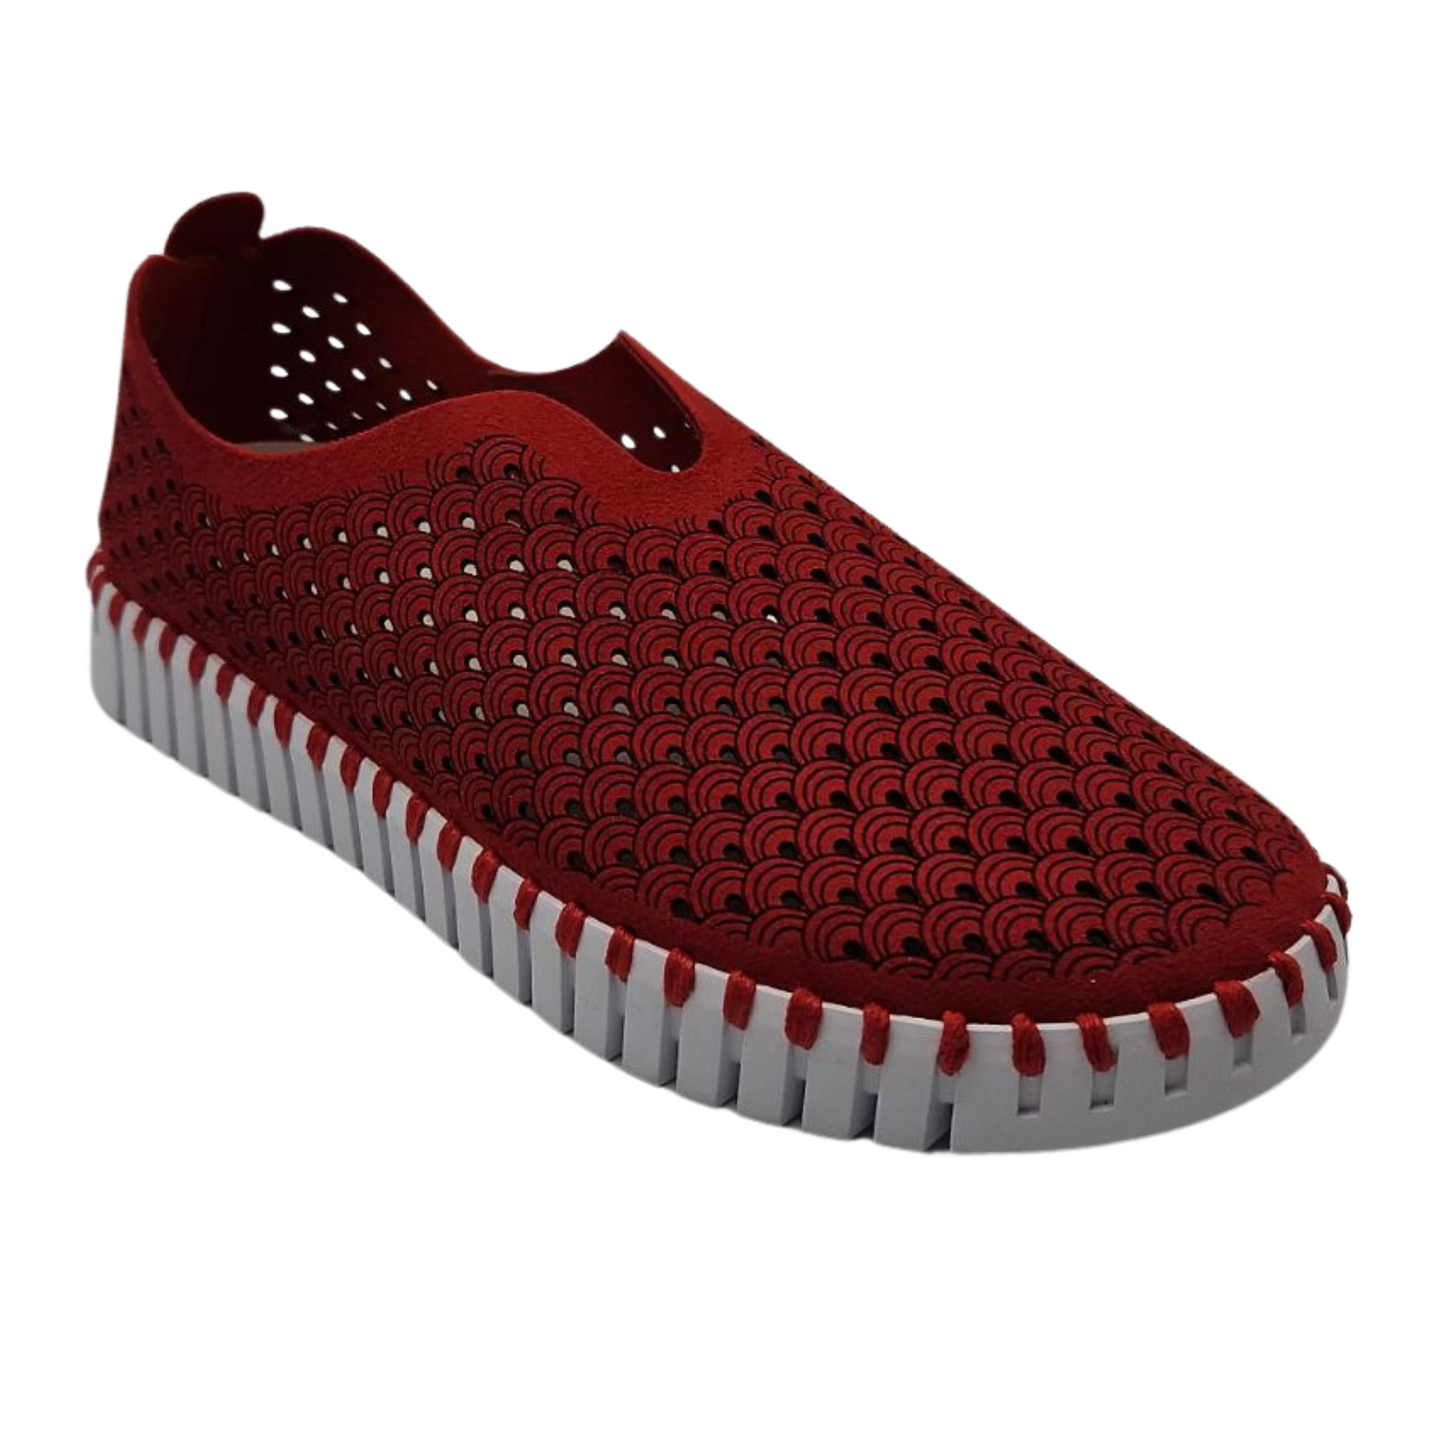 45 degree angled view of deep red mesh shoe with white rubber outsole